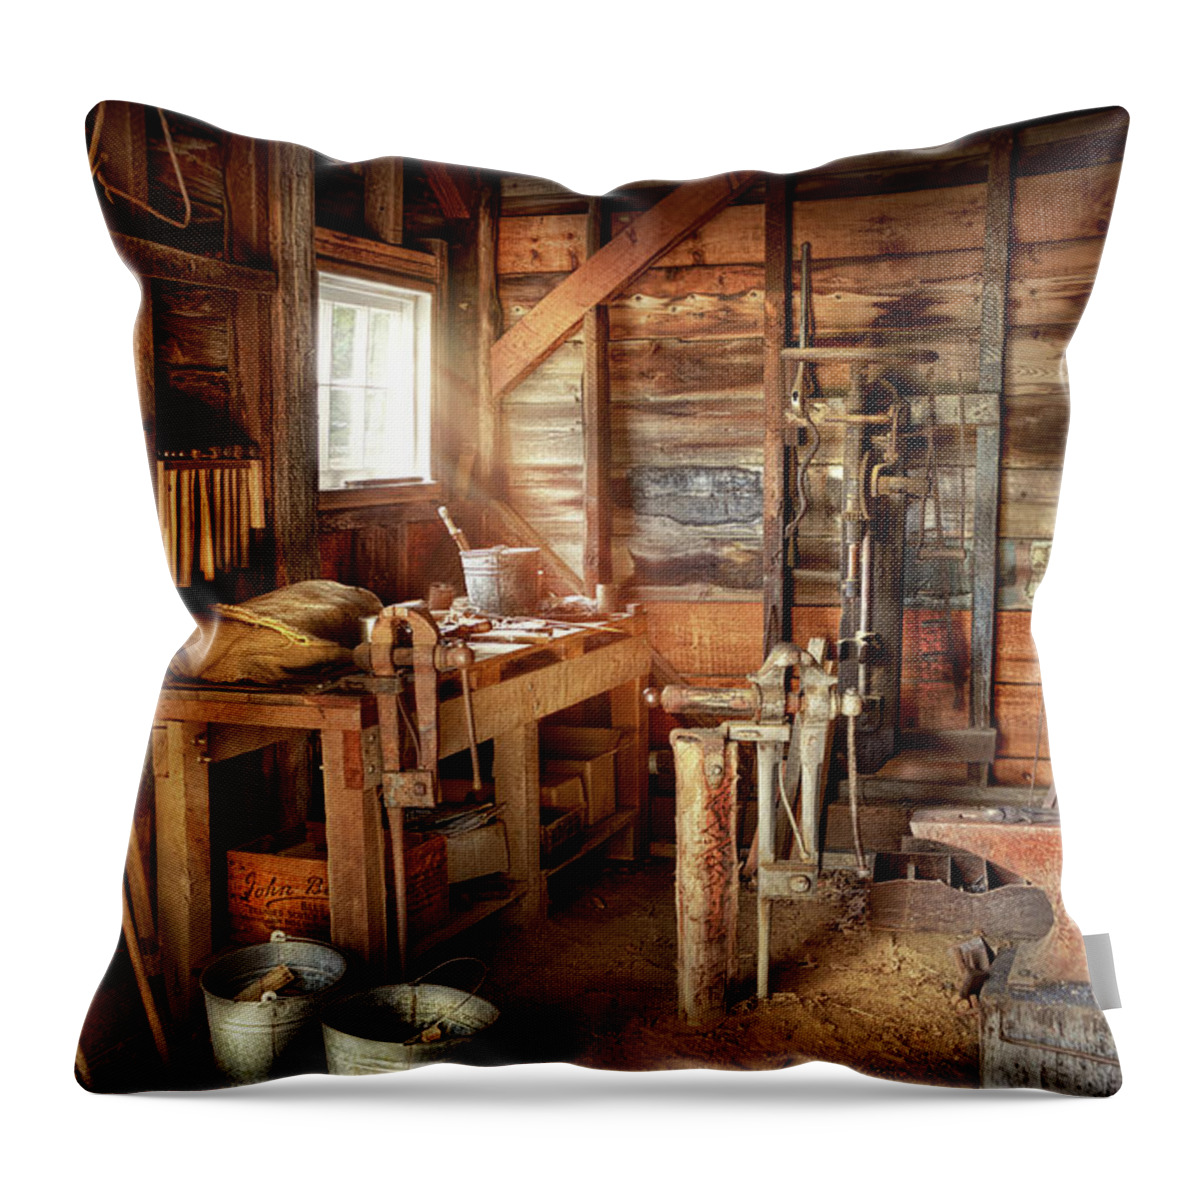 Blacksmith Throw Pillow featuring the photograph Blacksmith - Shapes iron with an anvil and hammer by Mike Savad